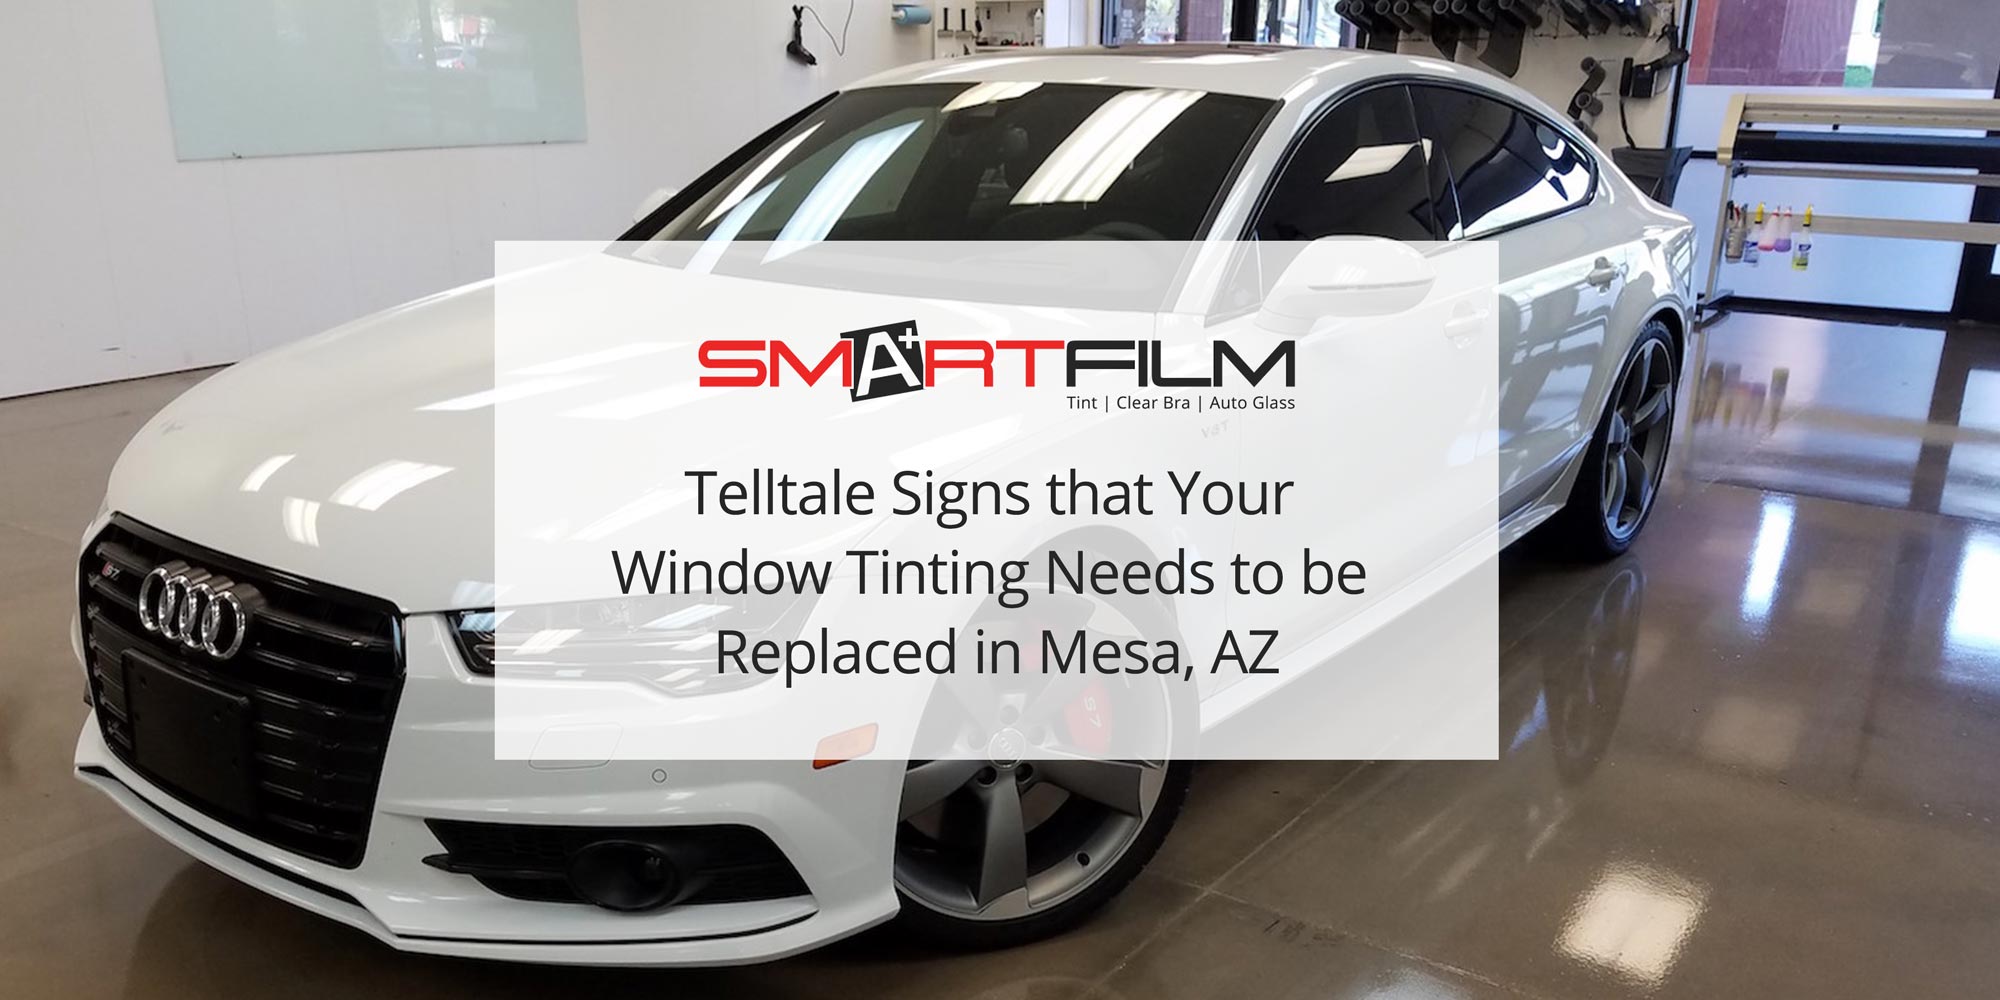 Window Tinting Needs to be Replaced in Mesa, AZ